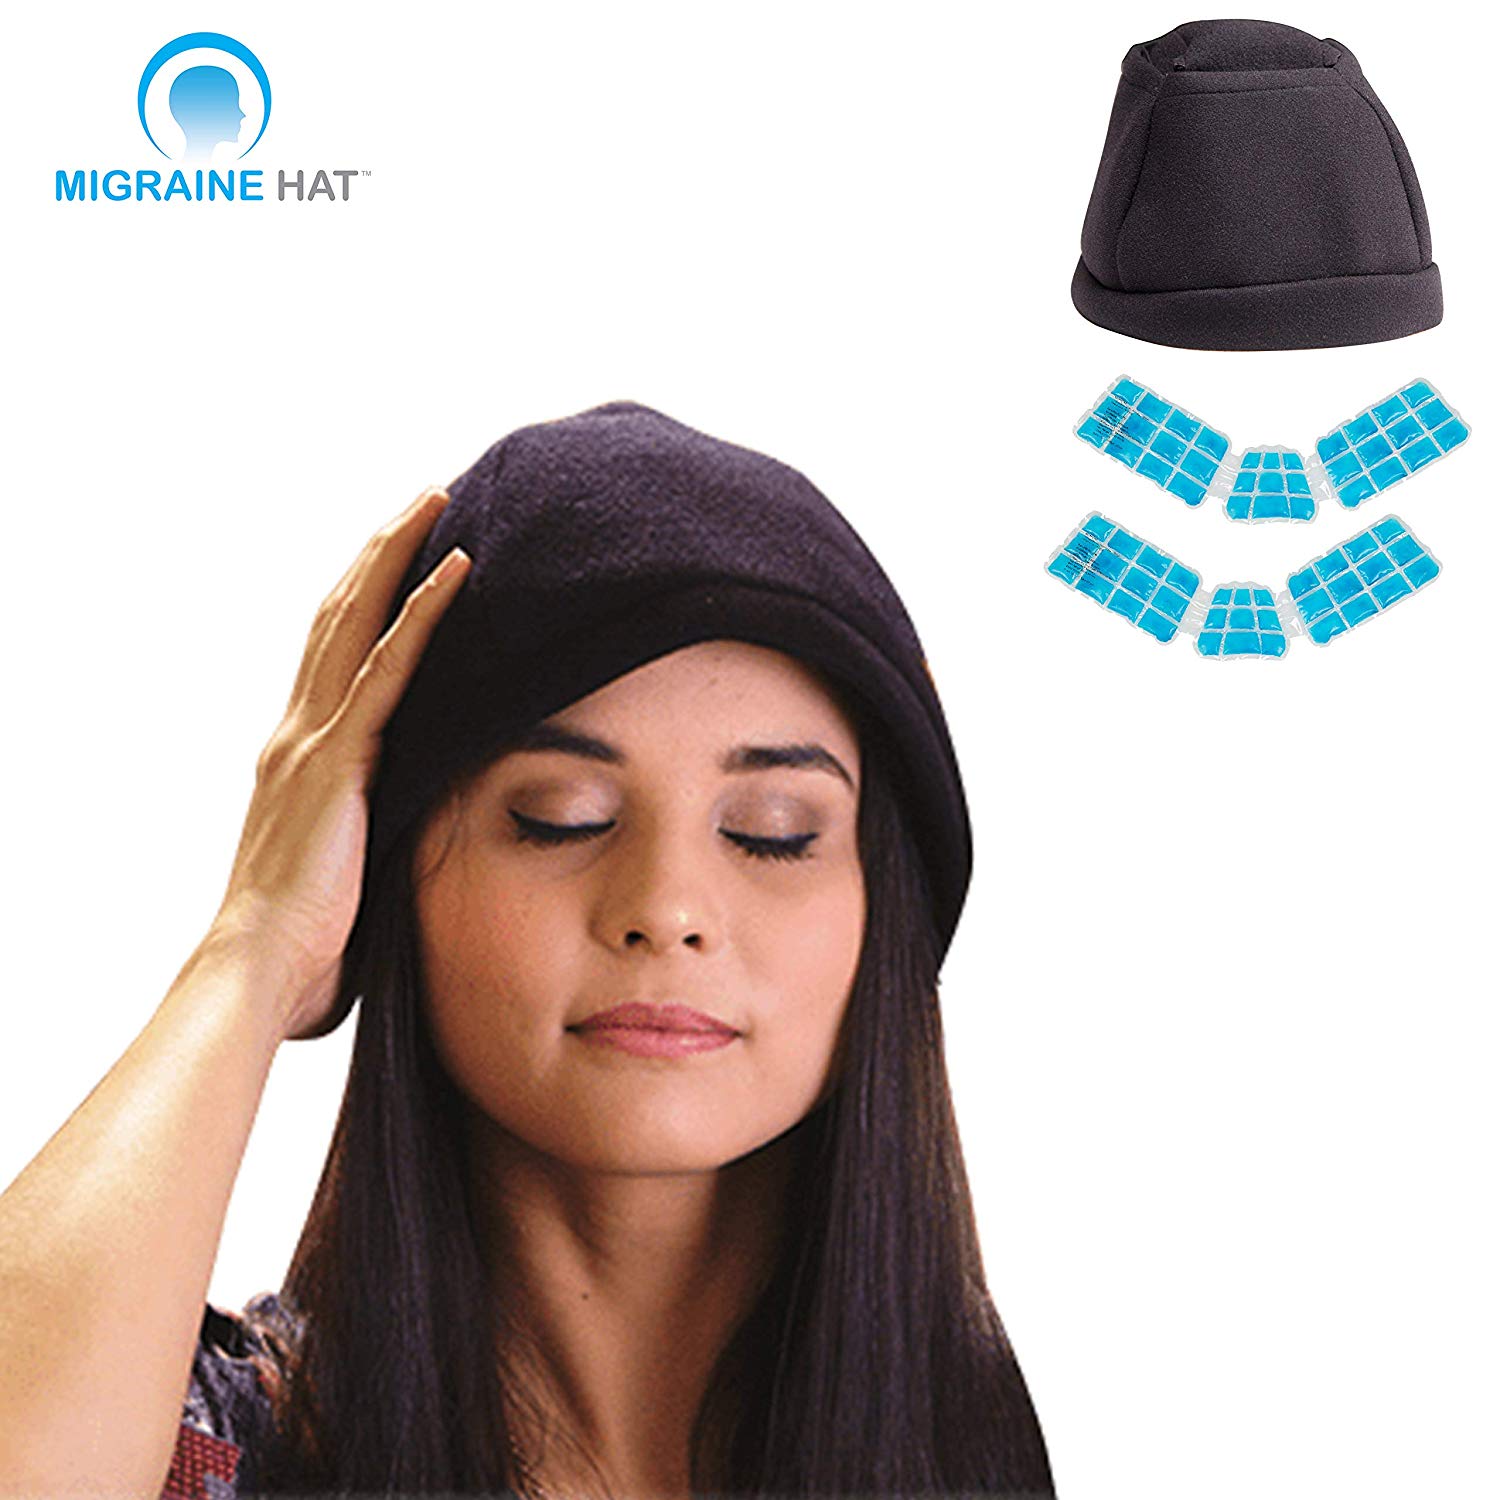 Wearable Ice Hat by Migraine Hat